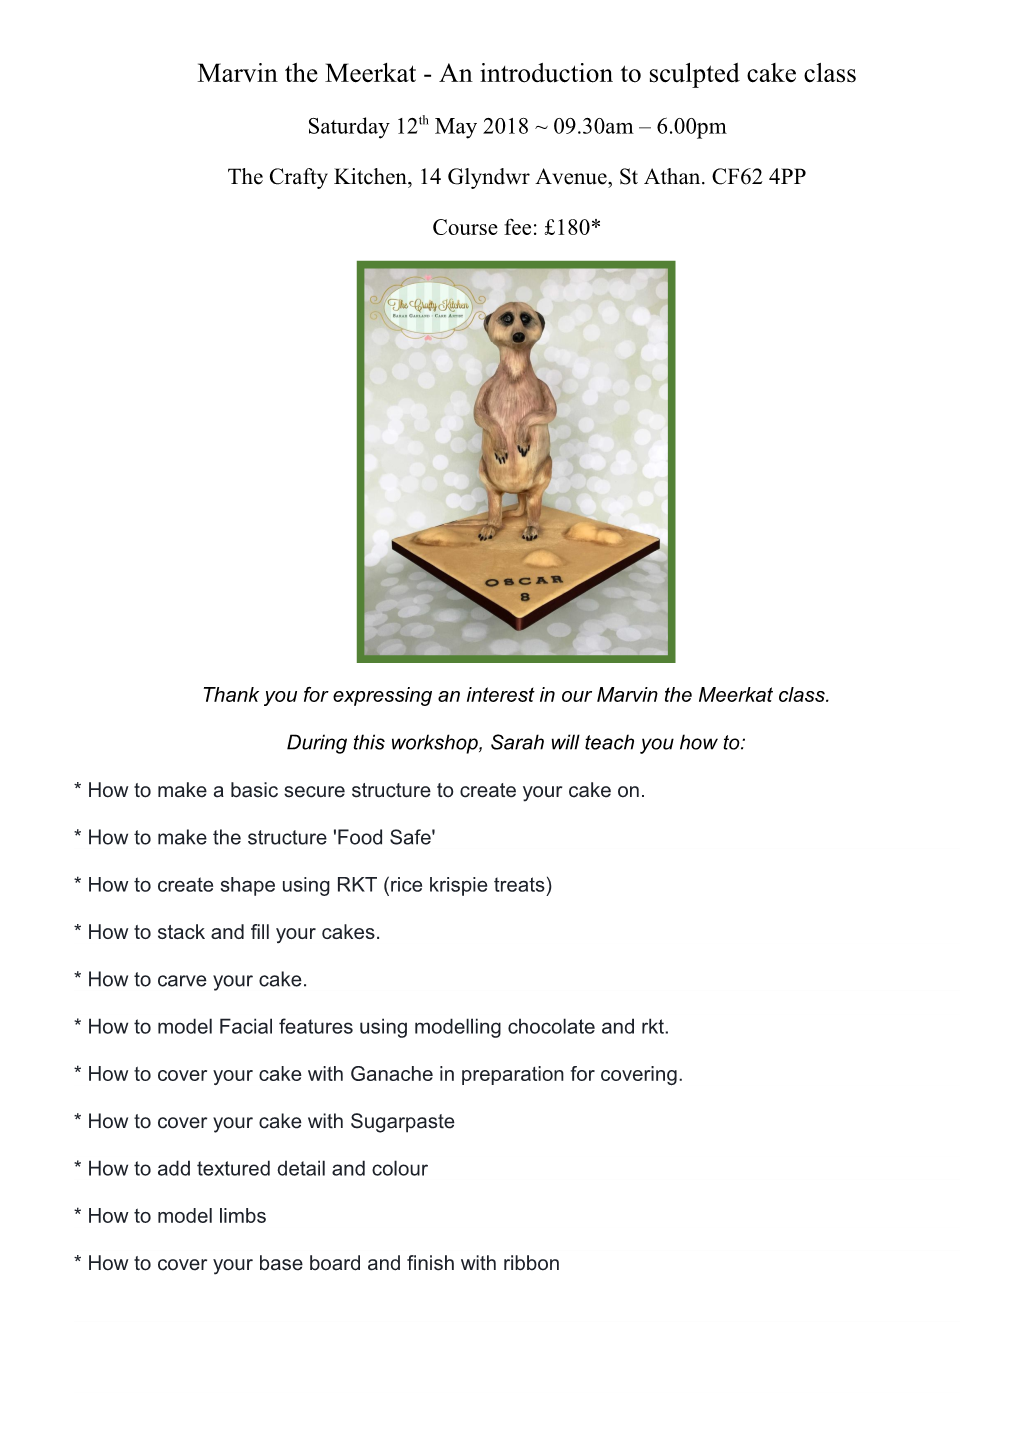 Marvin the Meerkat - an Introduction to Sculpted Cake Class